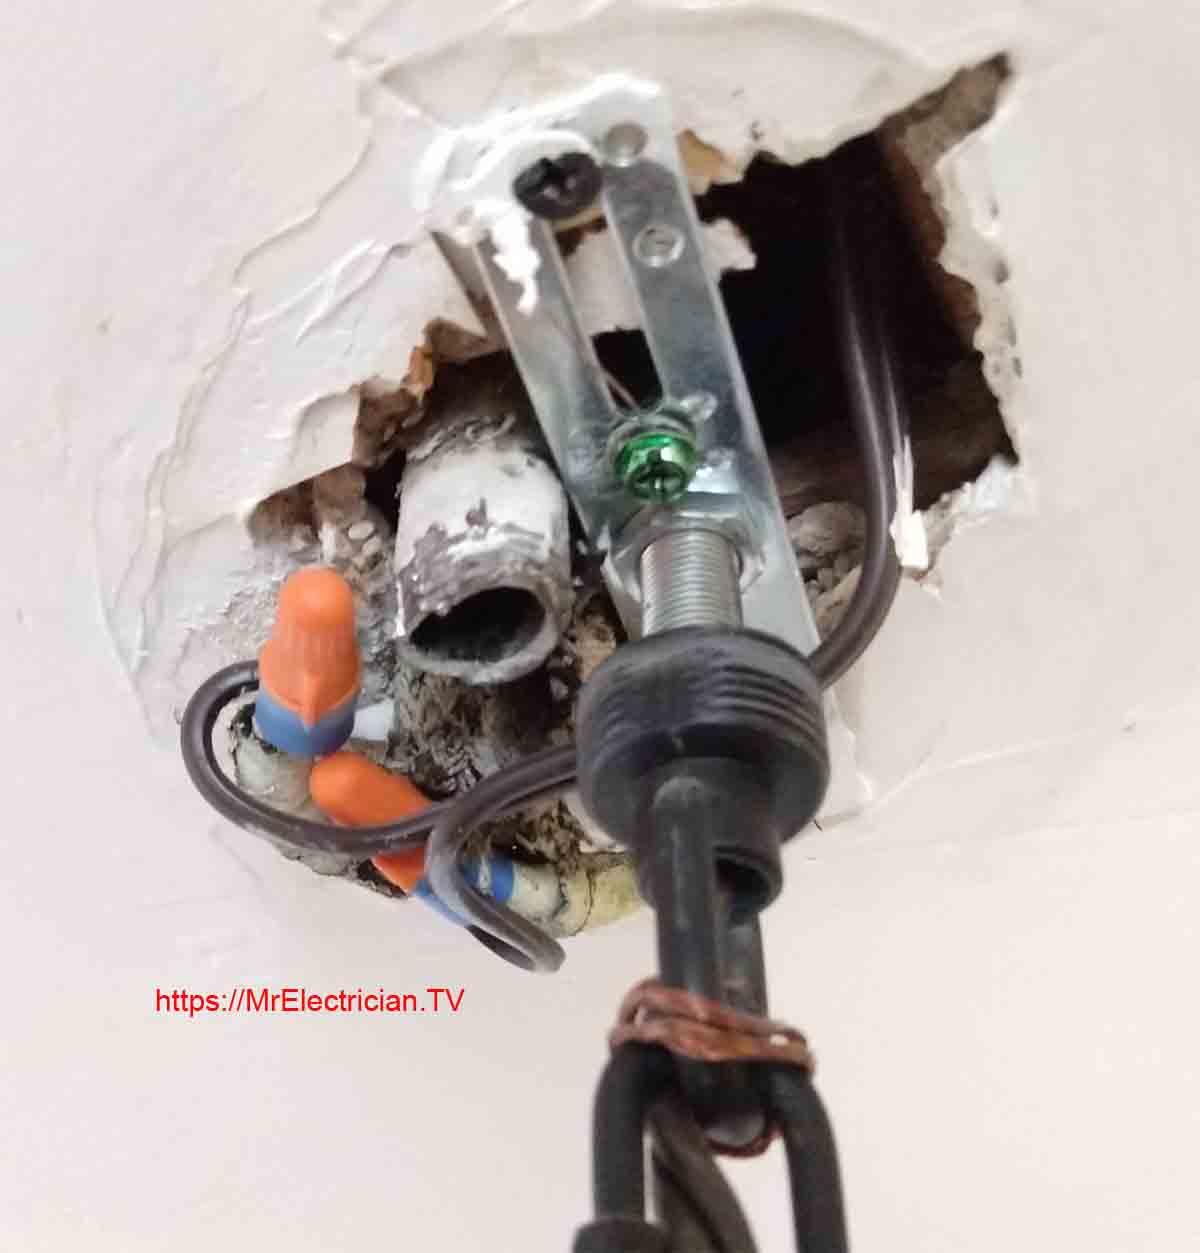 Light fixture wrongly installed with very old wiring without an electrical box in the ceiling